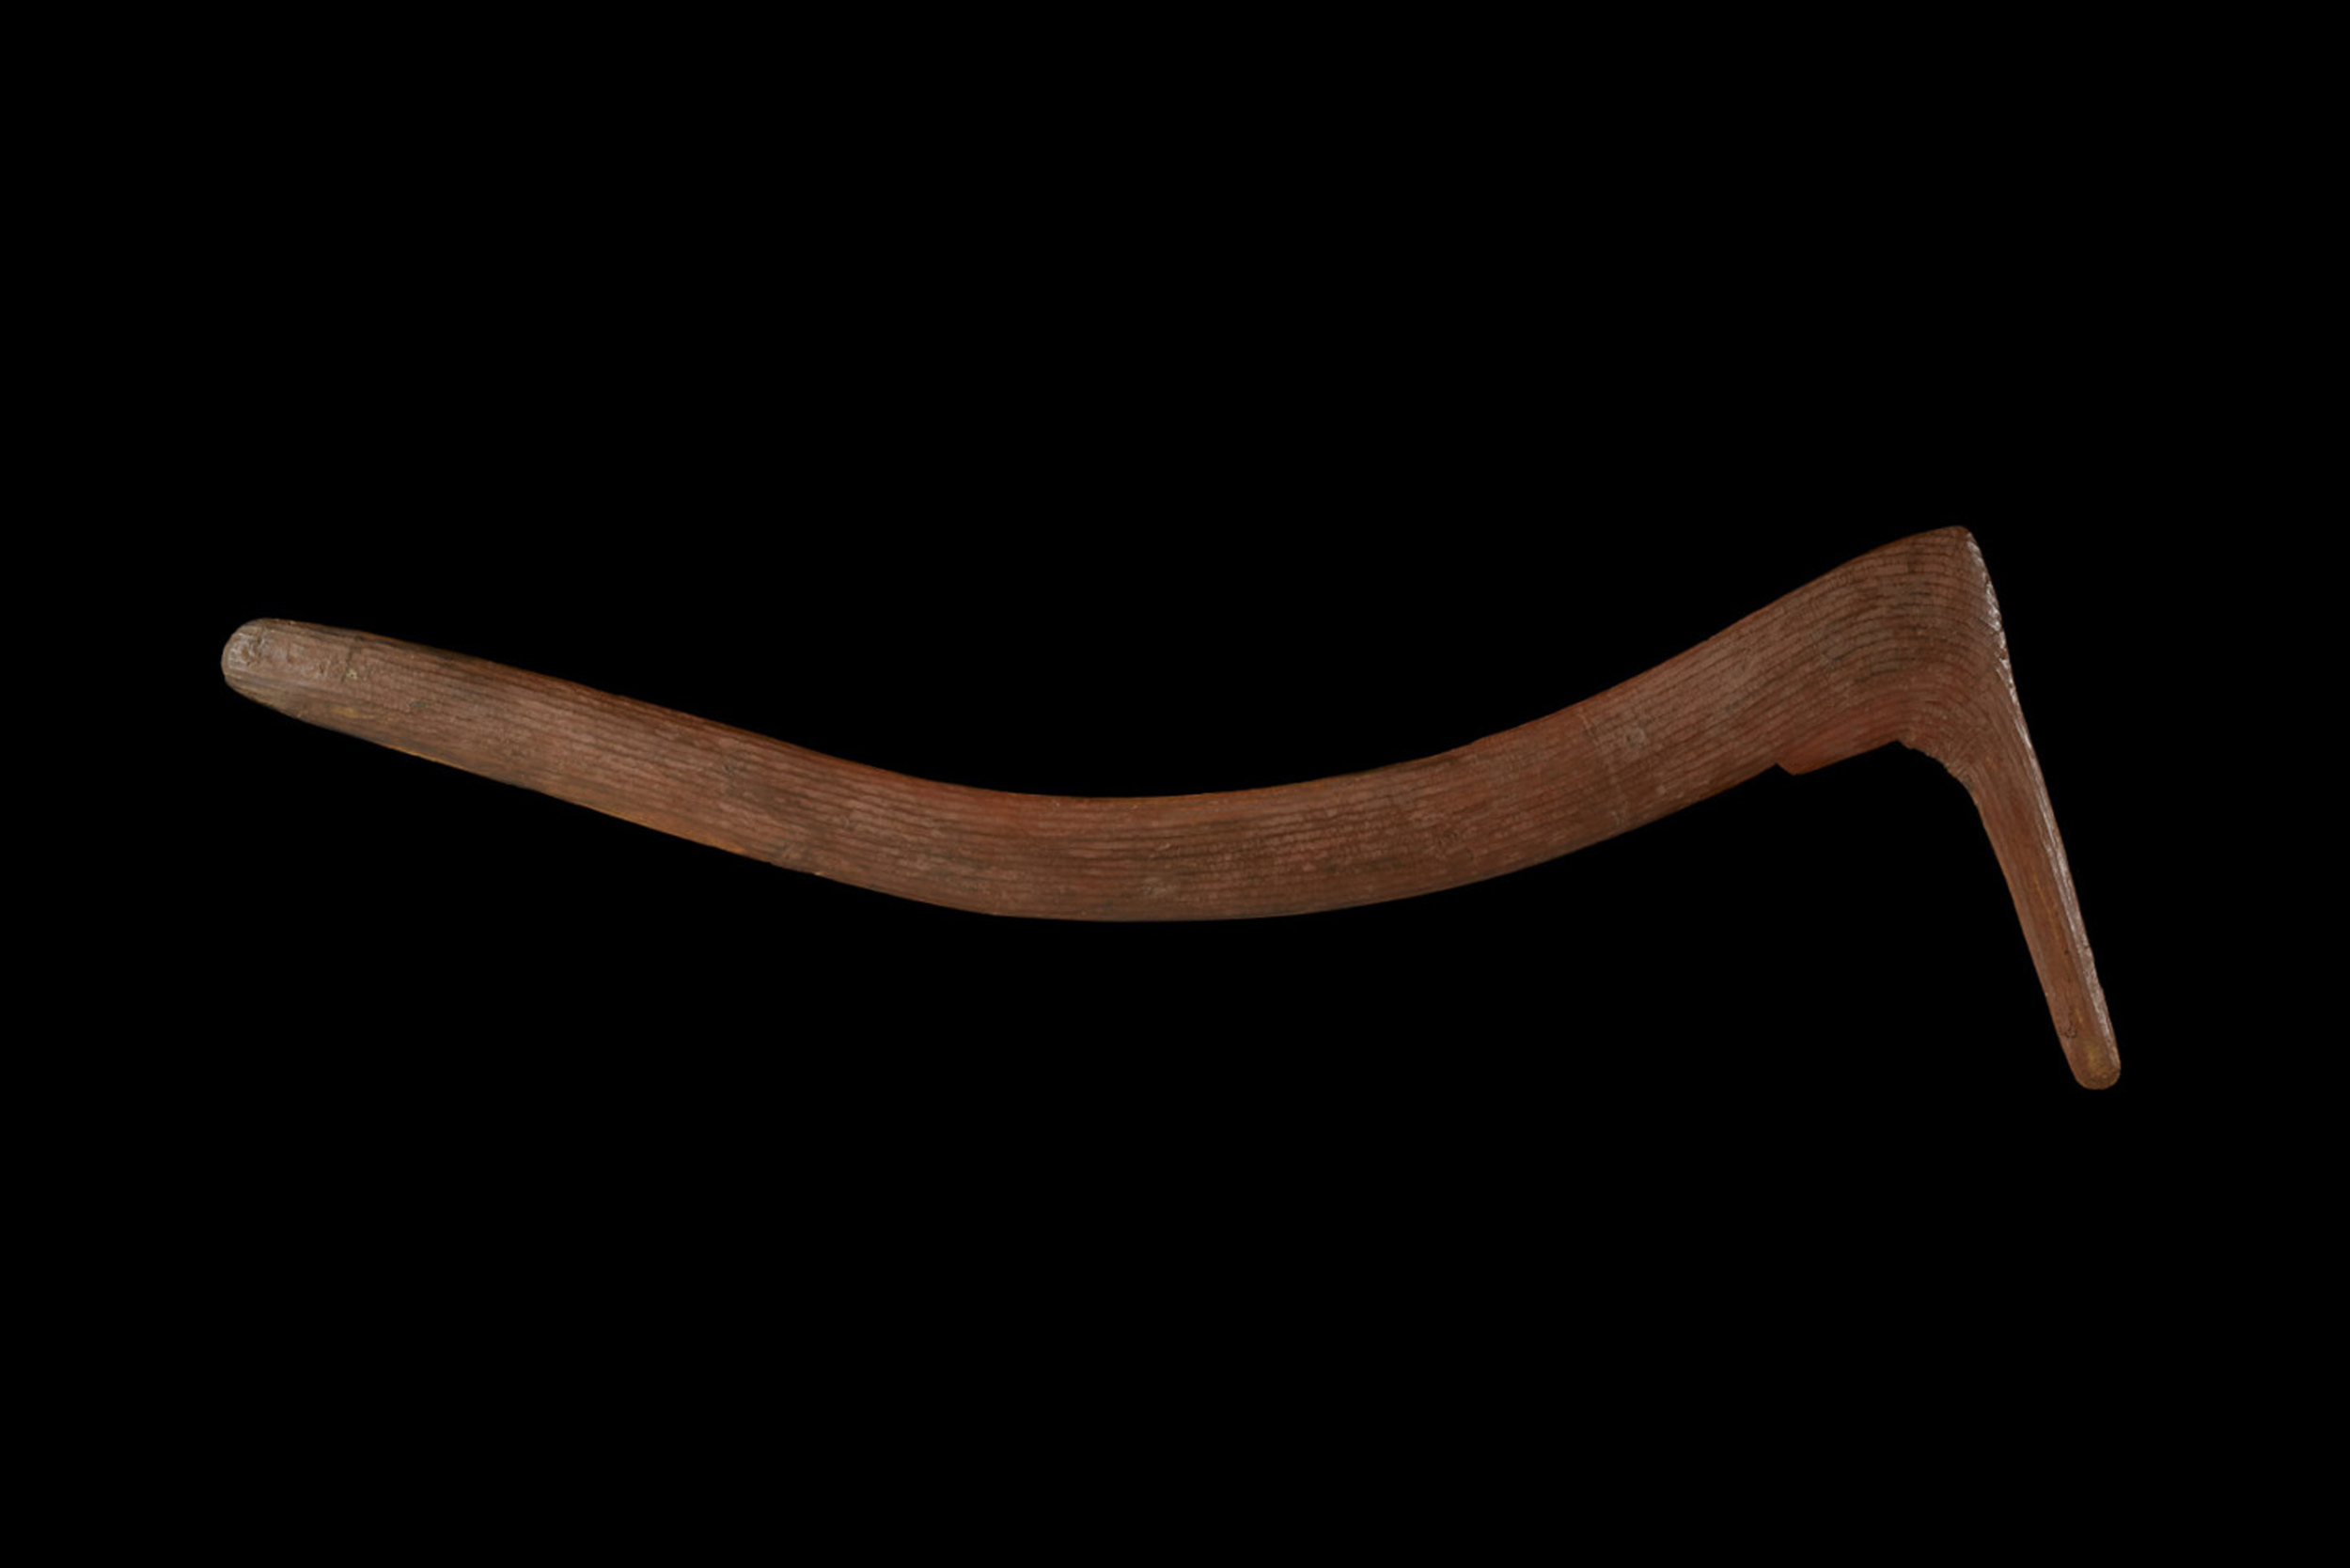  The Warumungu men of Tennant Creek and Alice Springs used hunting boomerangs fashioned from the base of wattle trees, where the trunk meets the root, to give them strength. 